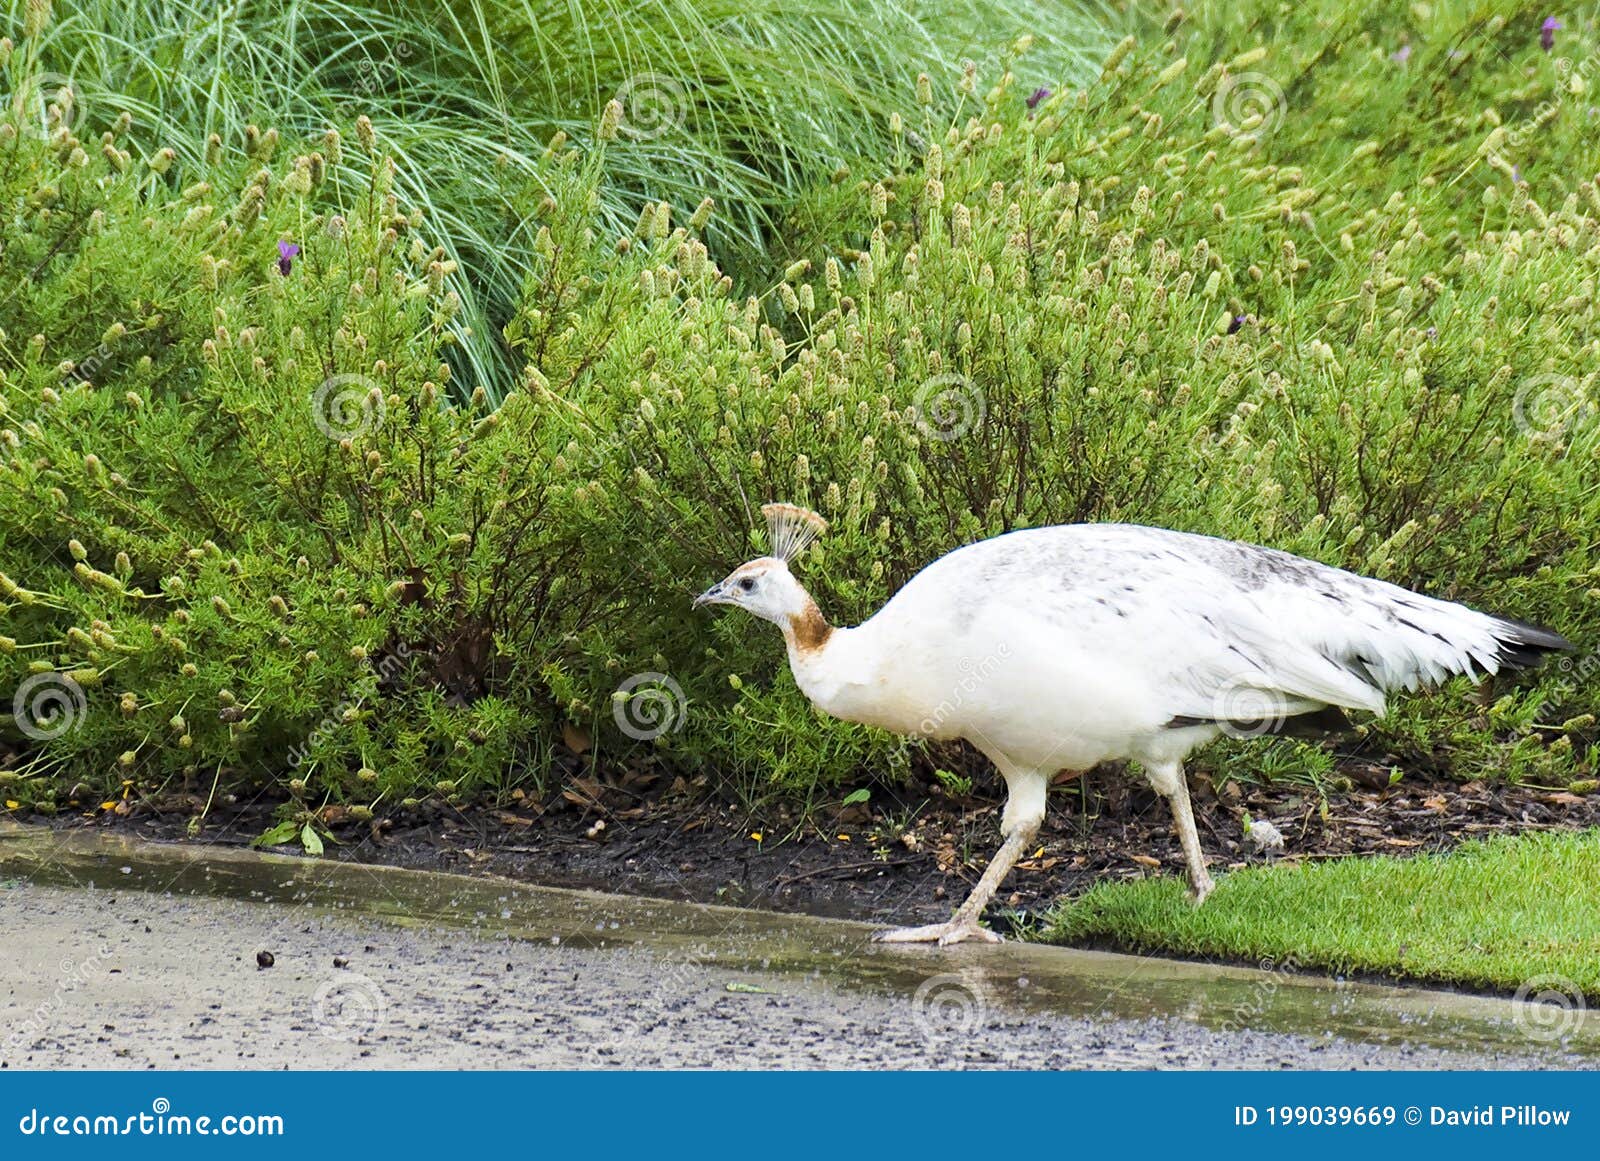 1 736 White Female Peacock Photos Free Royalty Free Stock Photos From Dreamstime